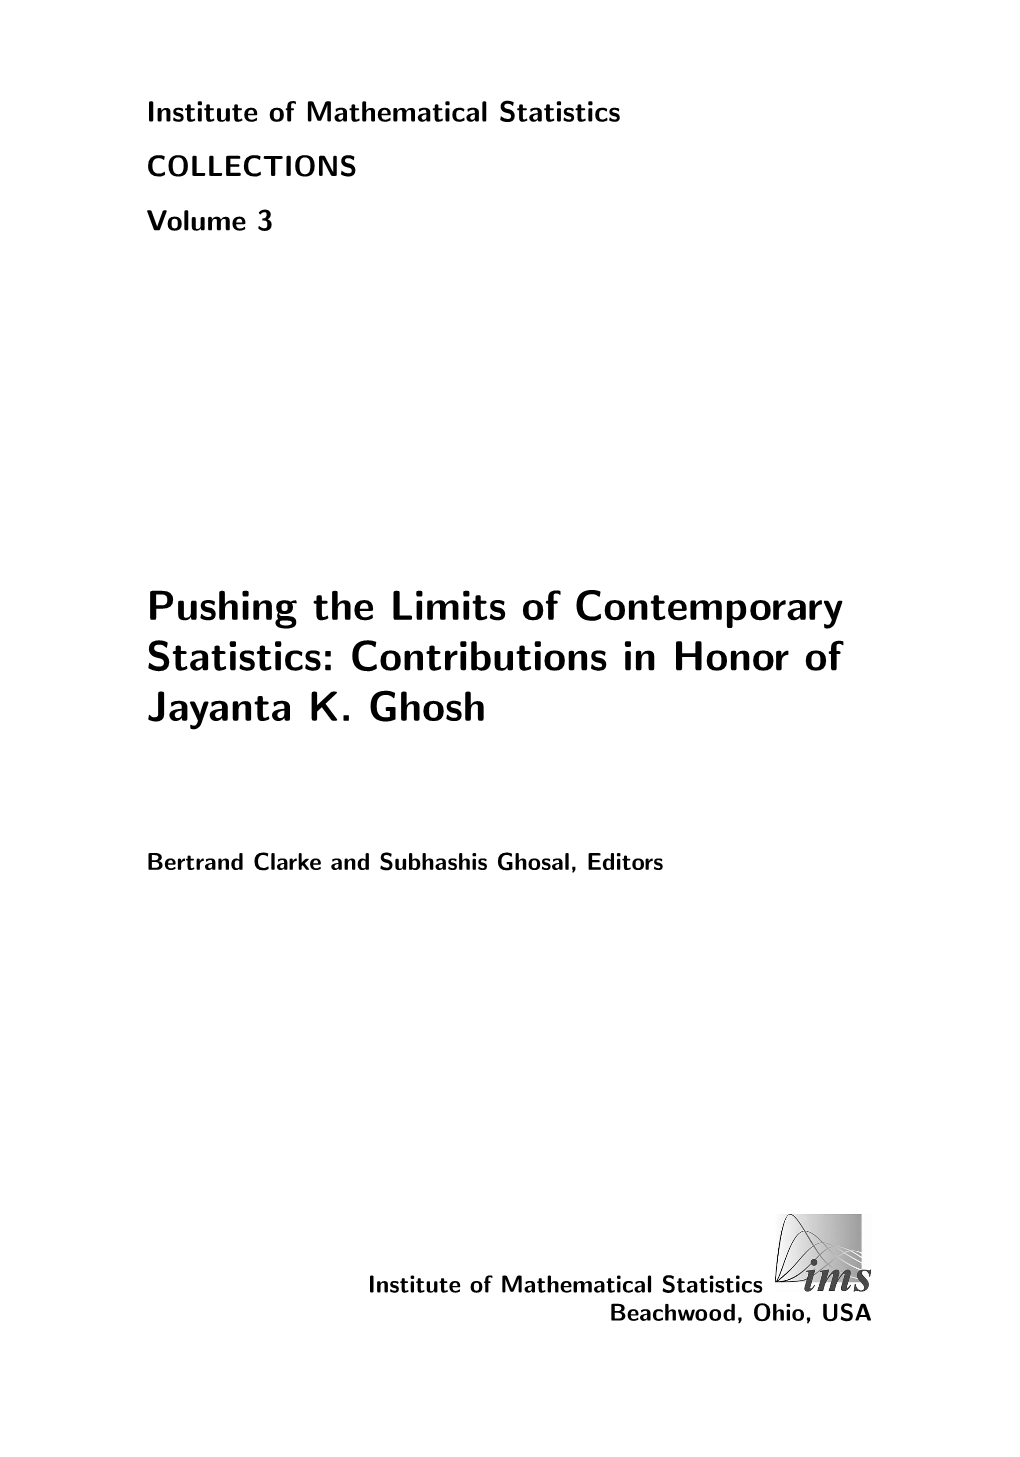 Contributions in Honor of Jayanta K. Ghosh